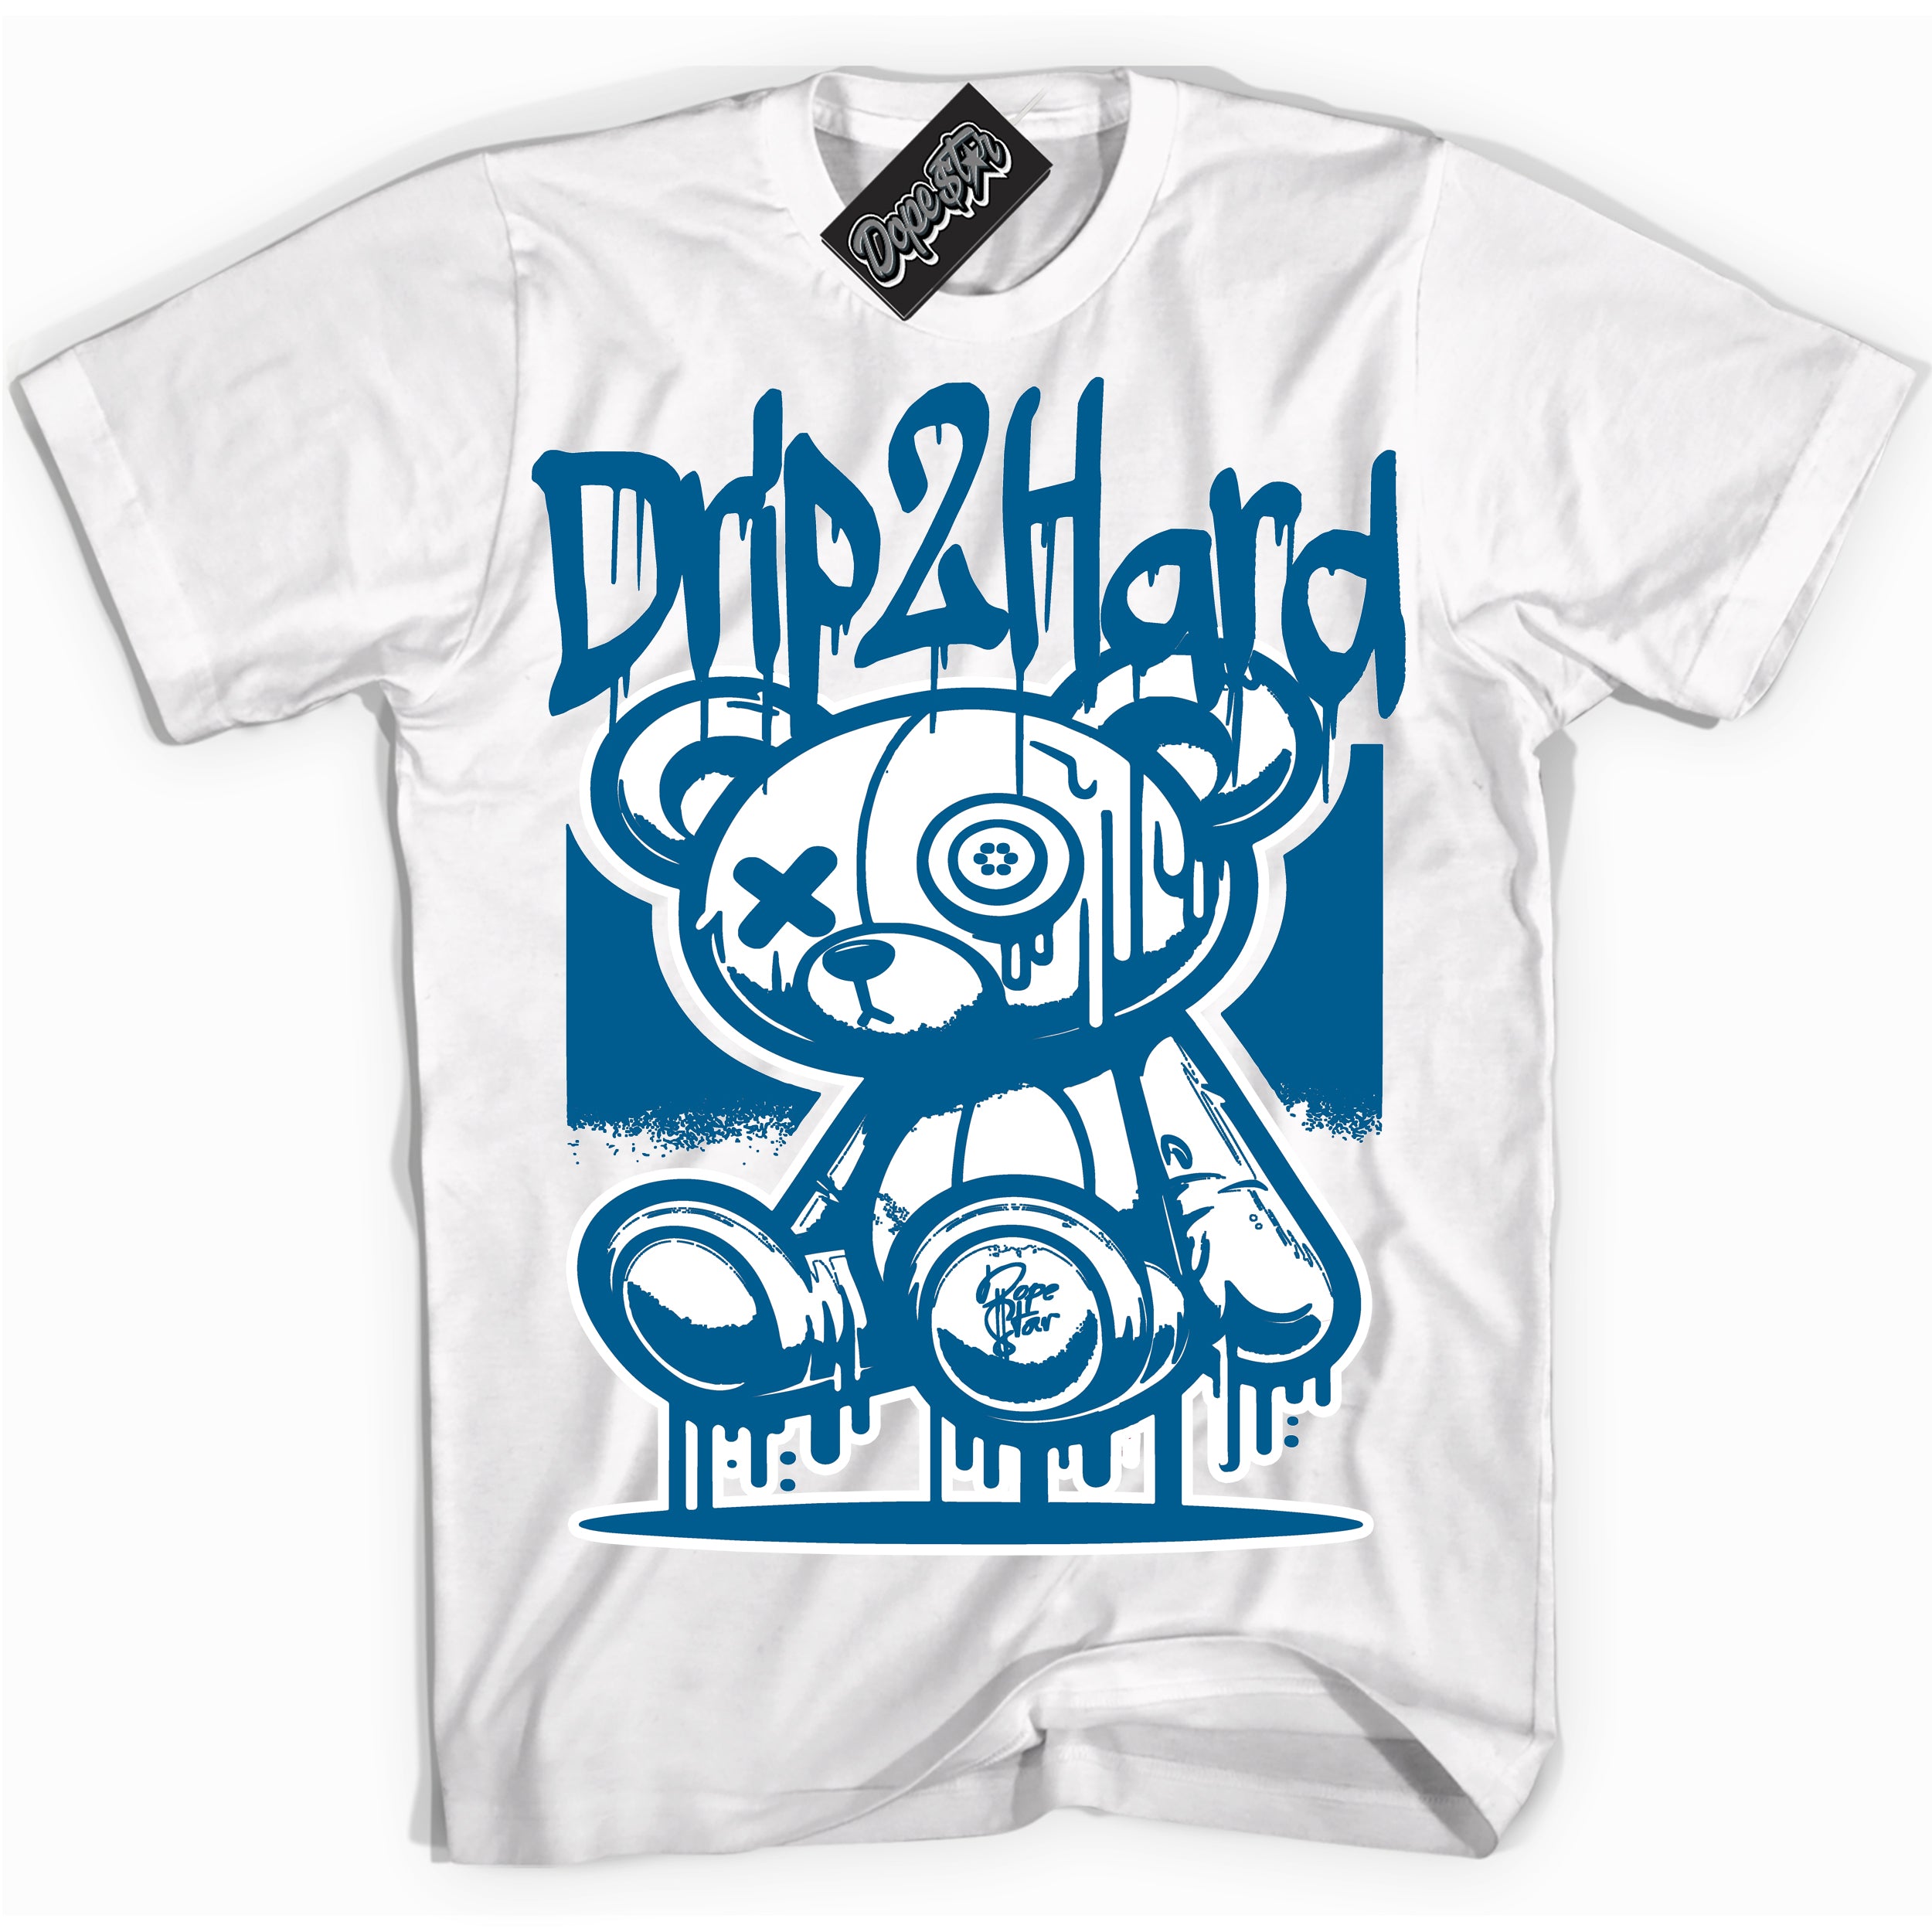 Cool White graphic tee with “ Drip 2 Hard ” design, that perfectly matches Marina Blue 11s